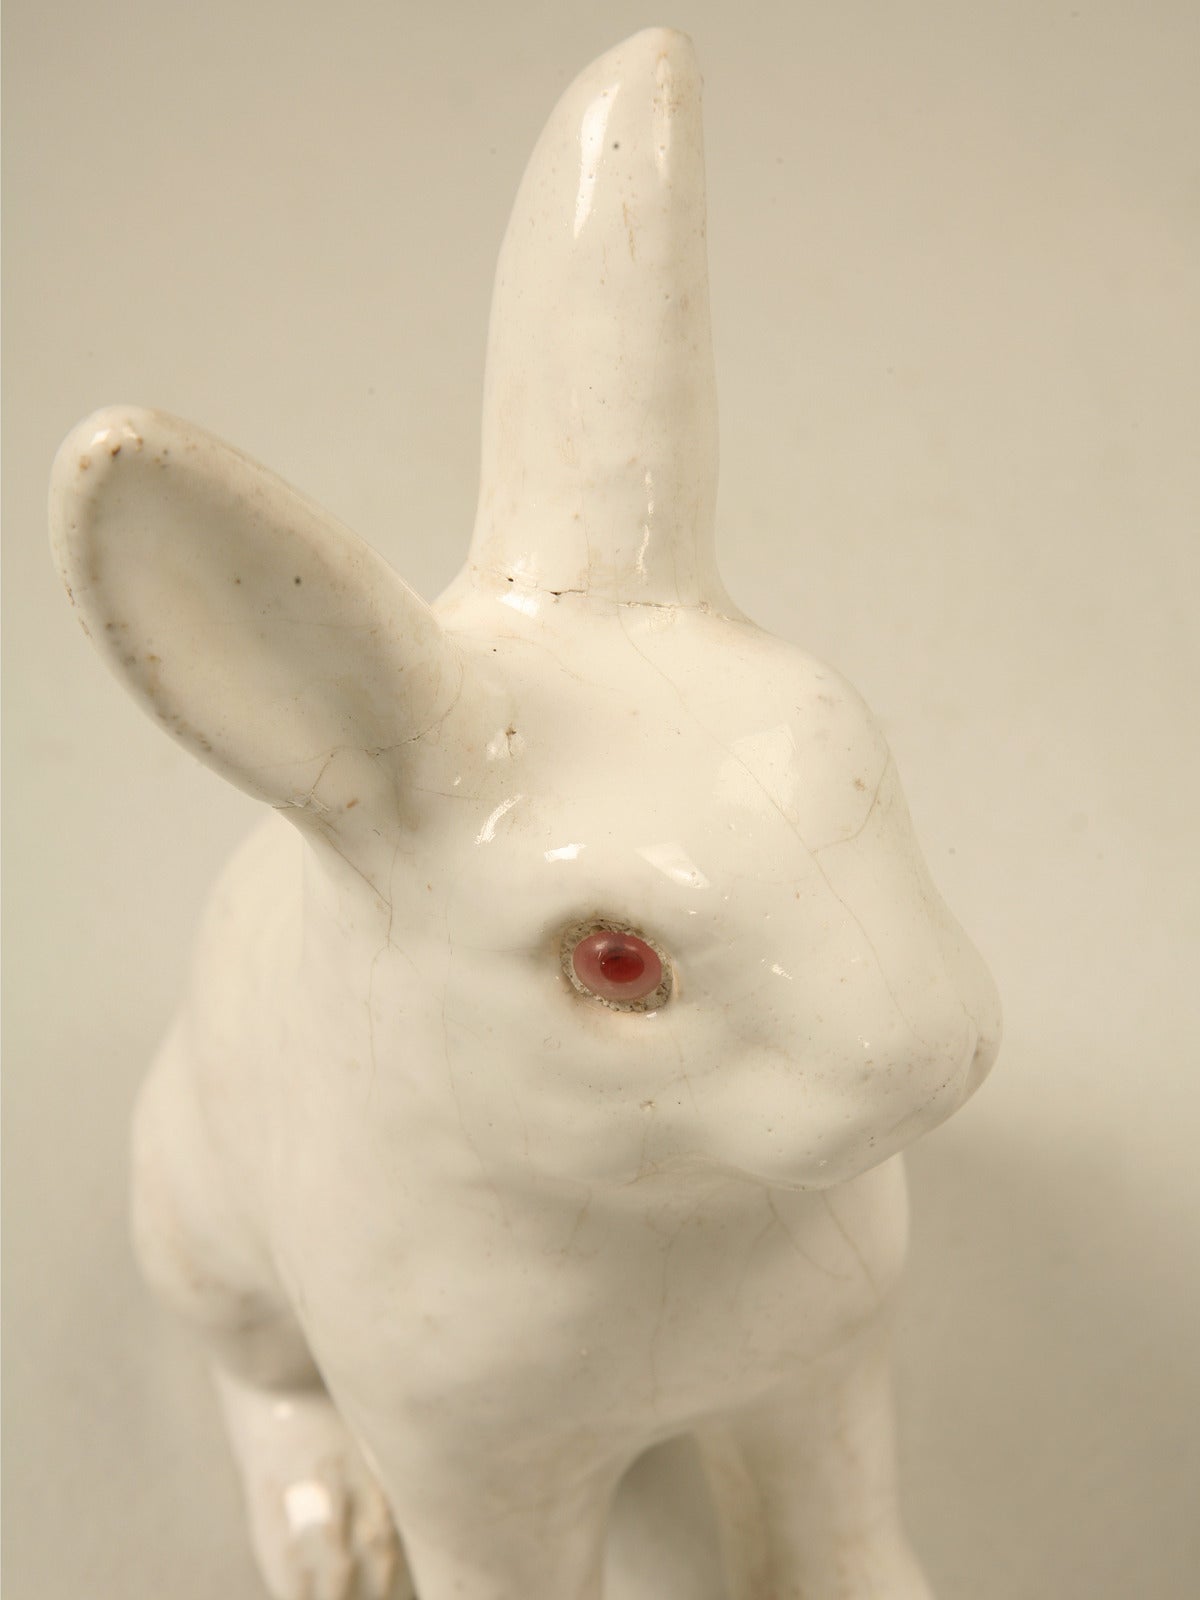 Almost certainly an earthenware rabbit produced by the company; La Poterie du Mesnil, from the Calvados region of Normandy, France, who have been in business since 1842. We highly suggest that if you are visiting the Normandy area, that you stop by